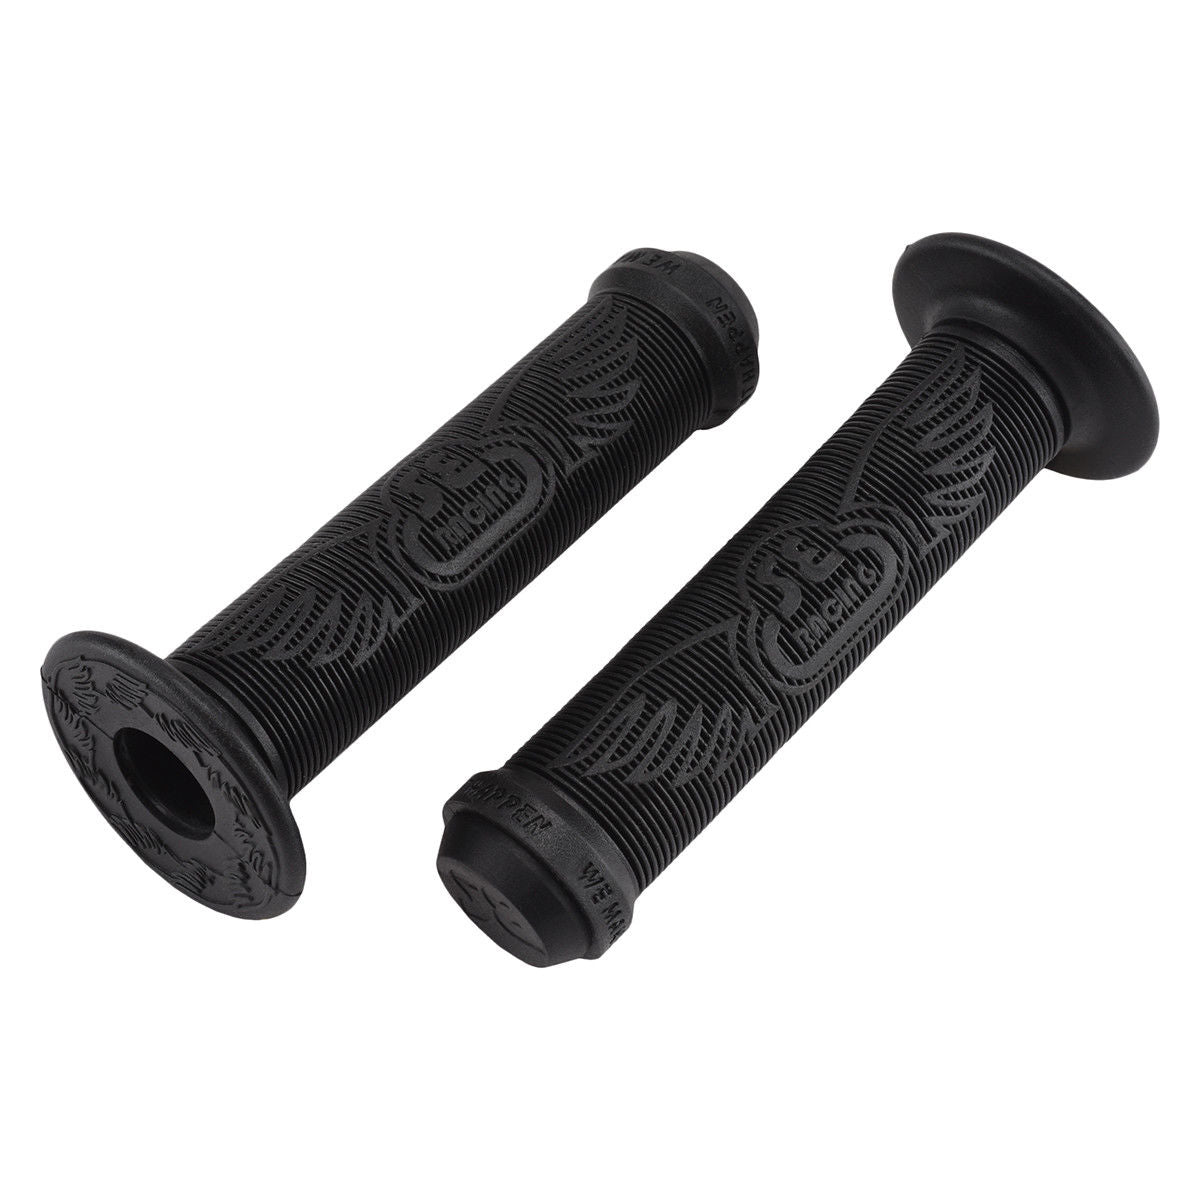 SE Racing Wing BMX  Grips - Flanged - Black